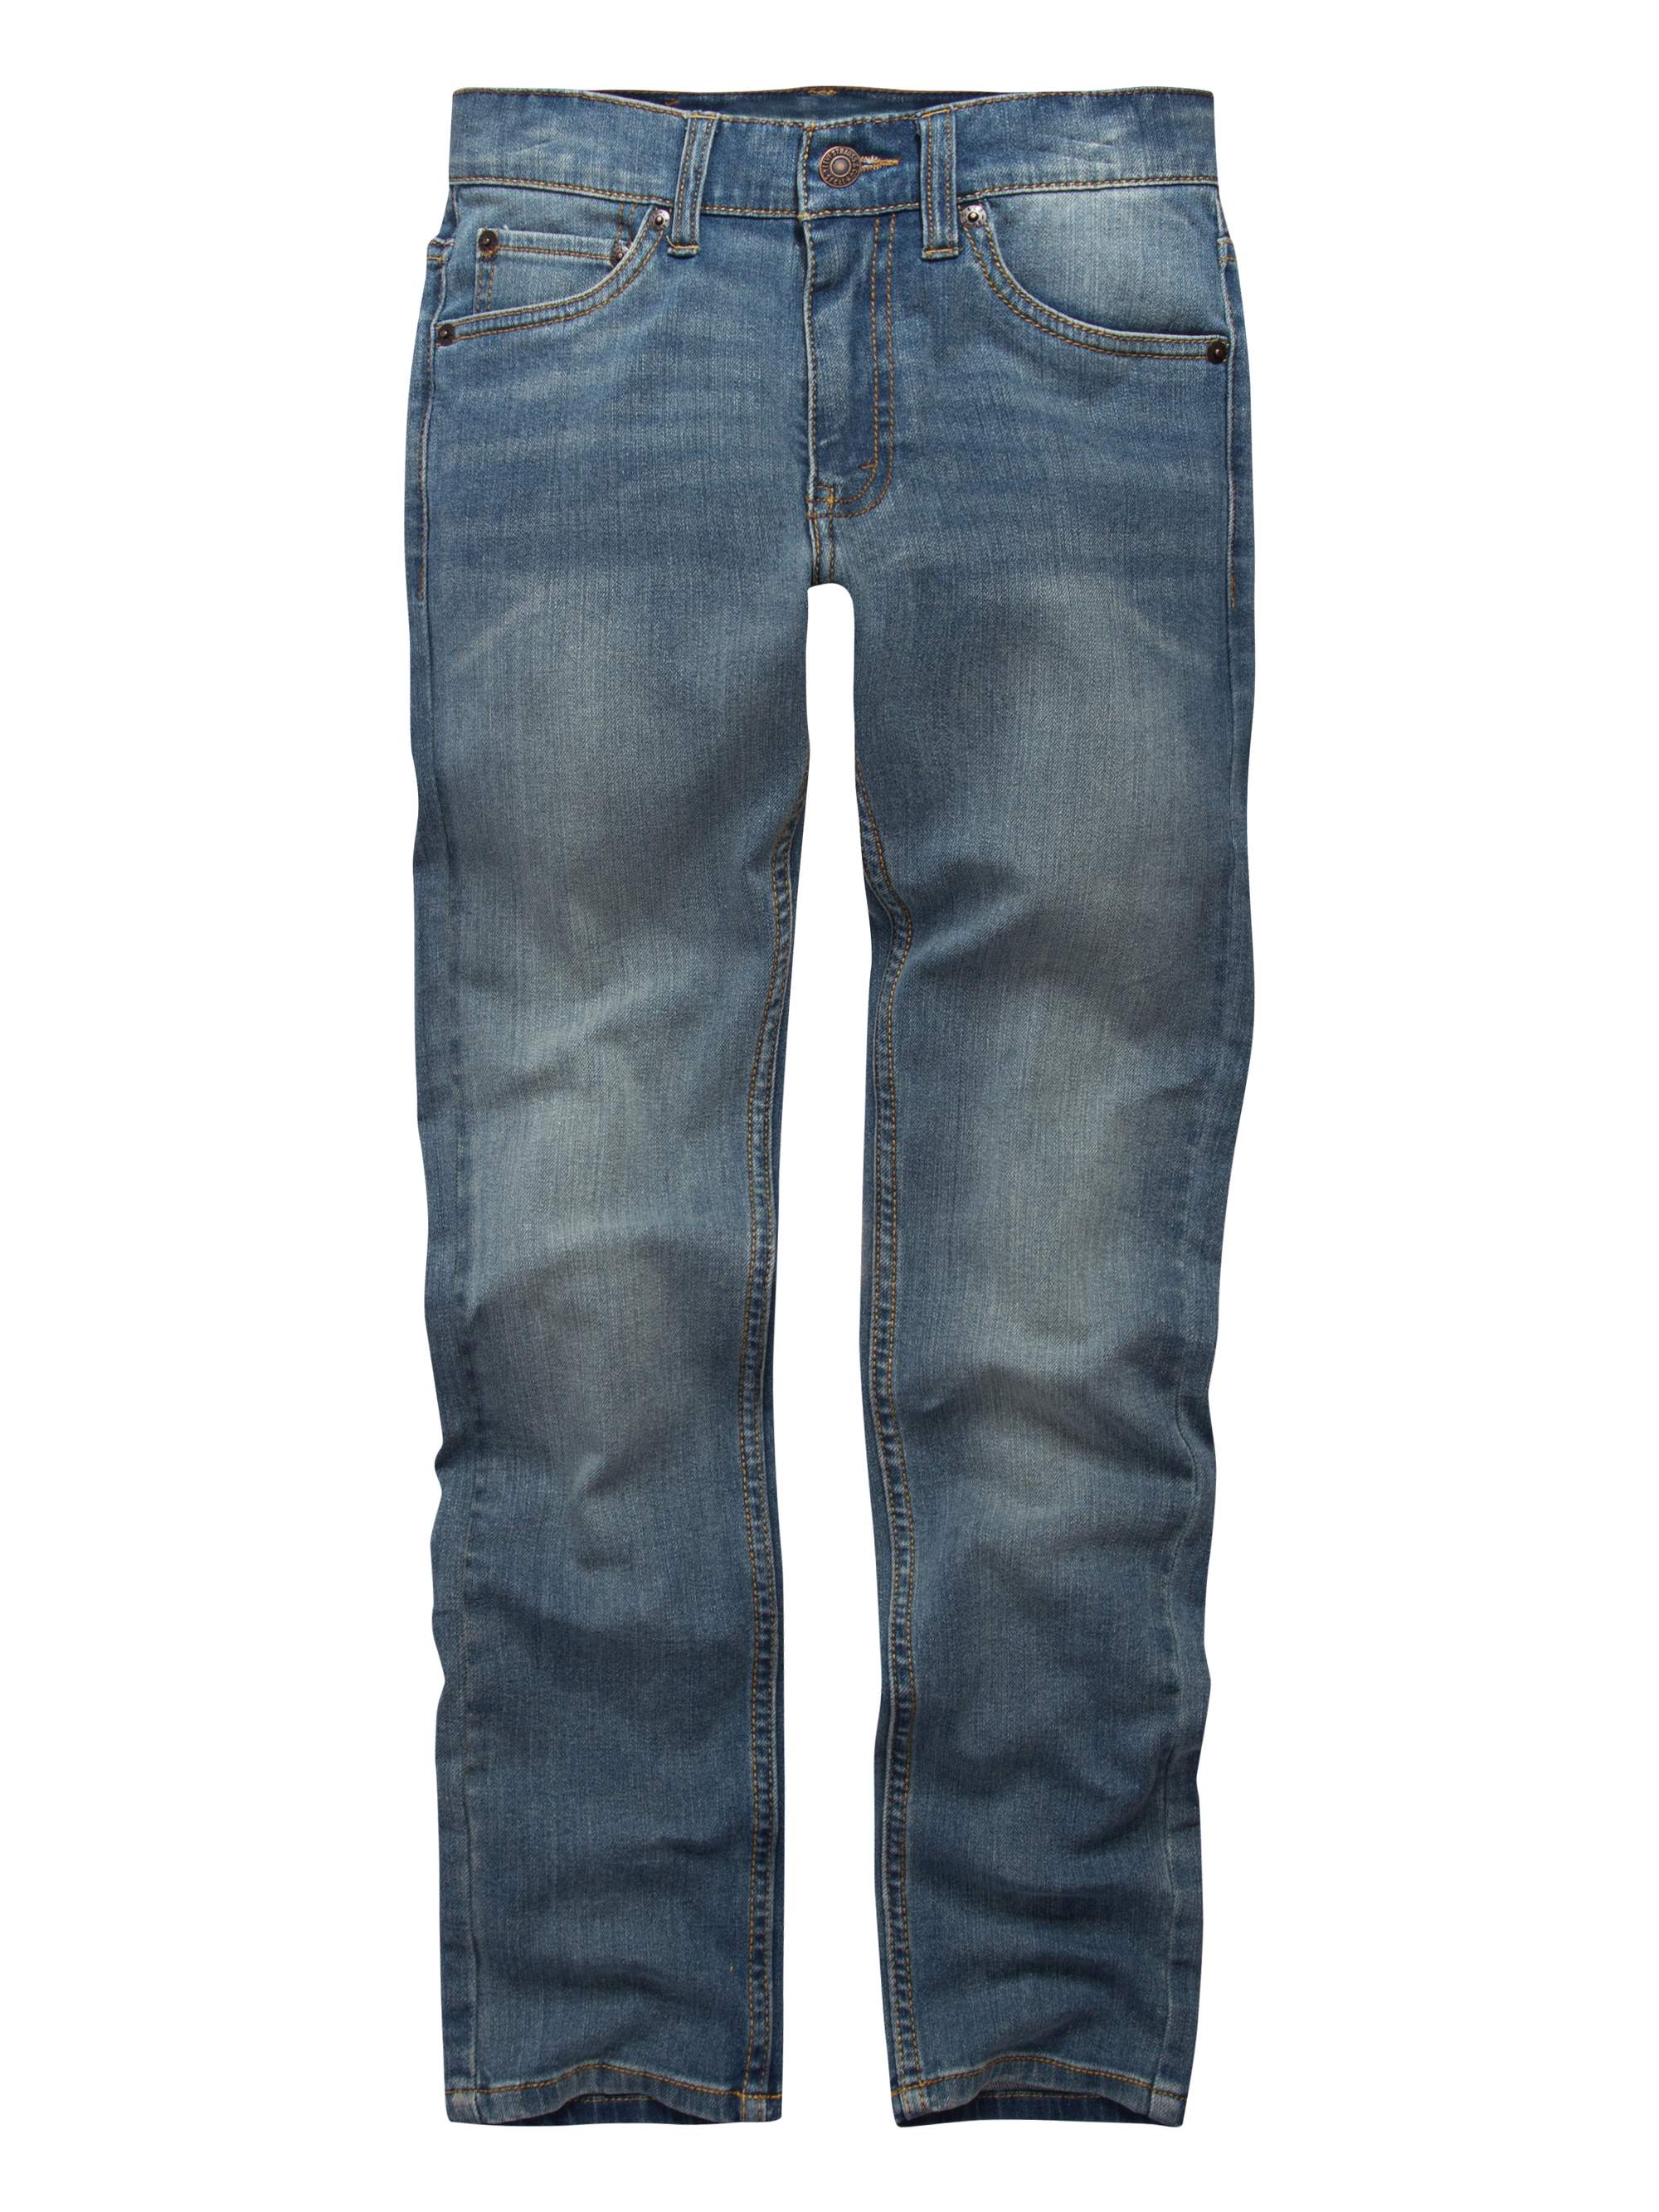 Levi's Boys' 510 Skinny Fit Jeans, Sizes 4-20 - image 1 of 3